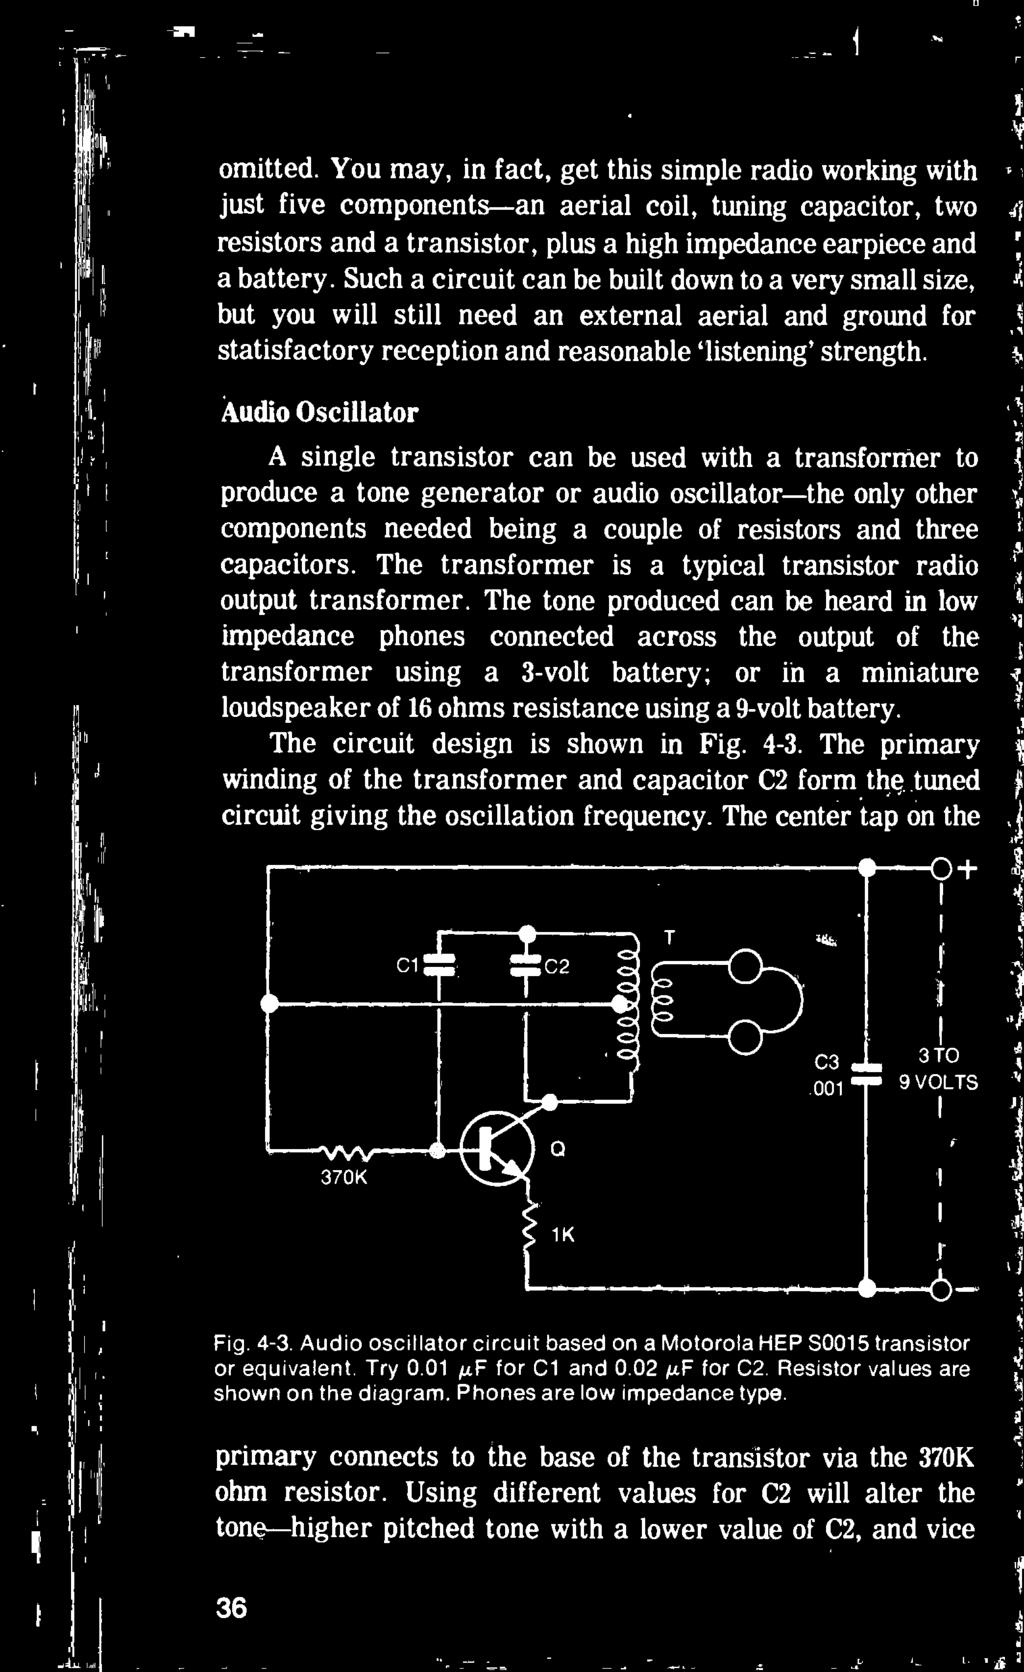 The tone produced can be heard in low impedance phones connected across the output of the transformer using a 3 -volt battery; or in a miniature loudspeaker of 16 ohms resistance using a 9 -volt